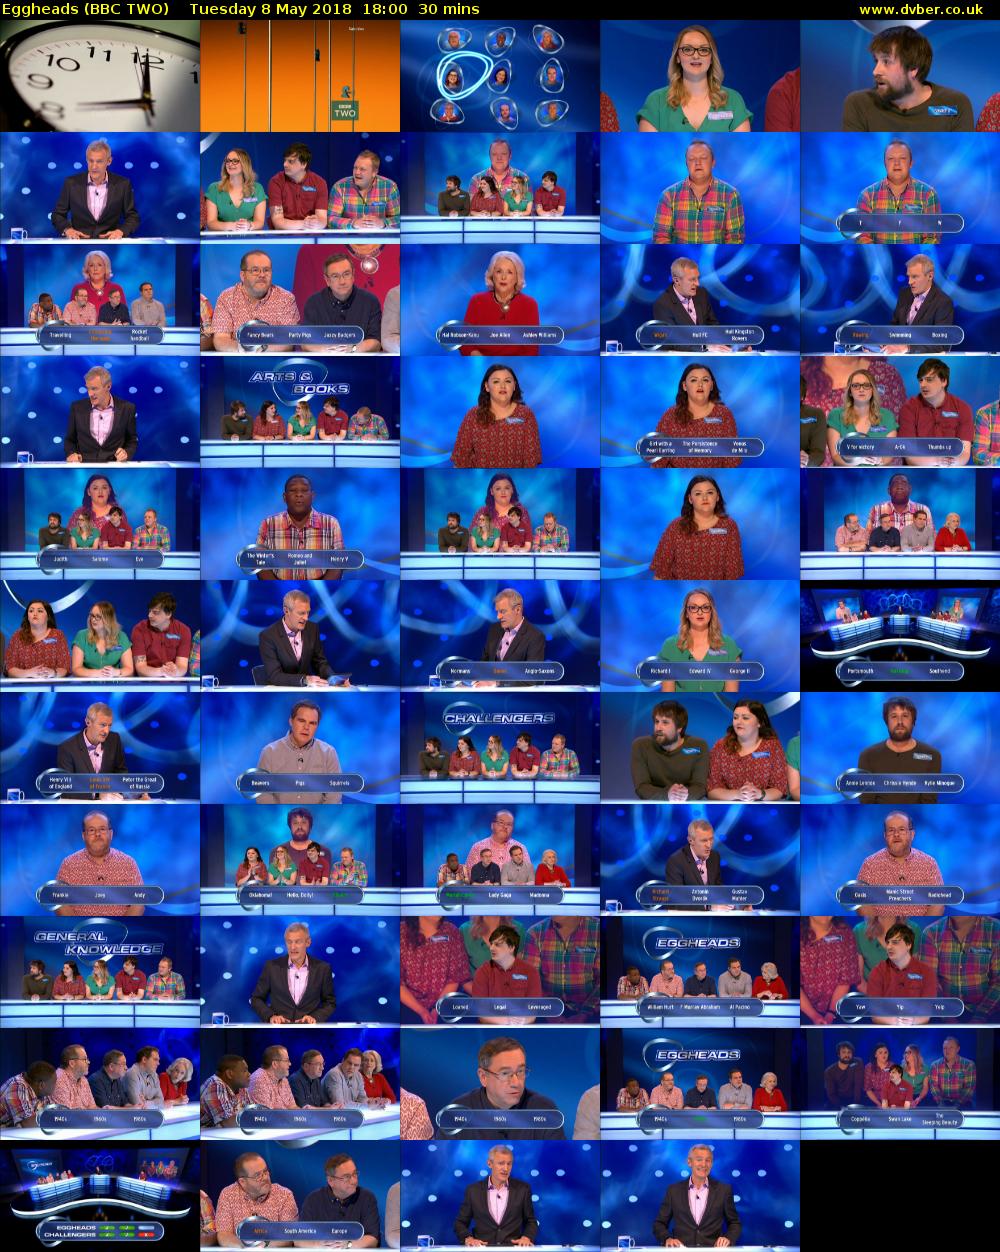 Eggheads (BBC TWO) Tuesday 8 May 2018 18:00 - 18:30